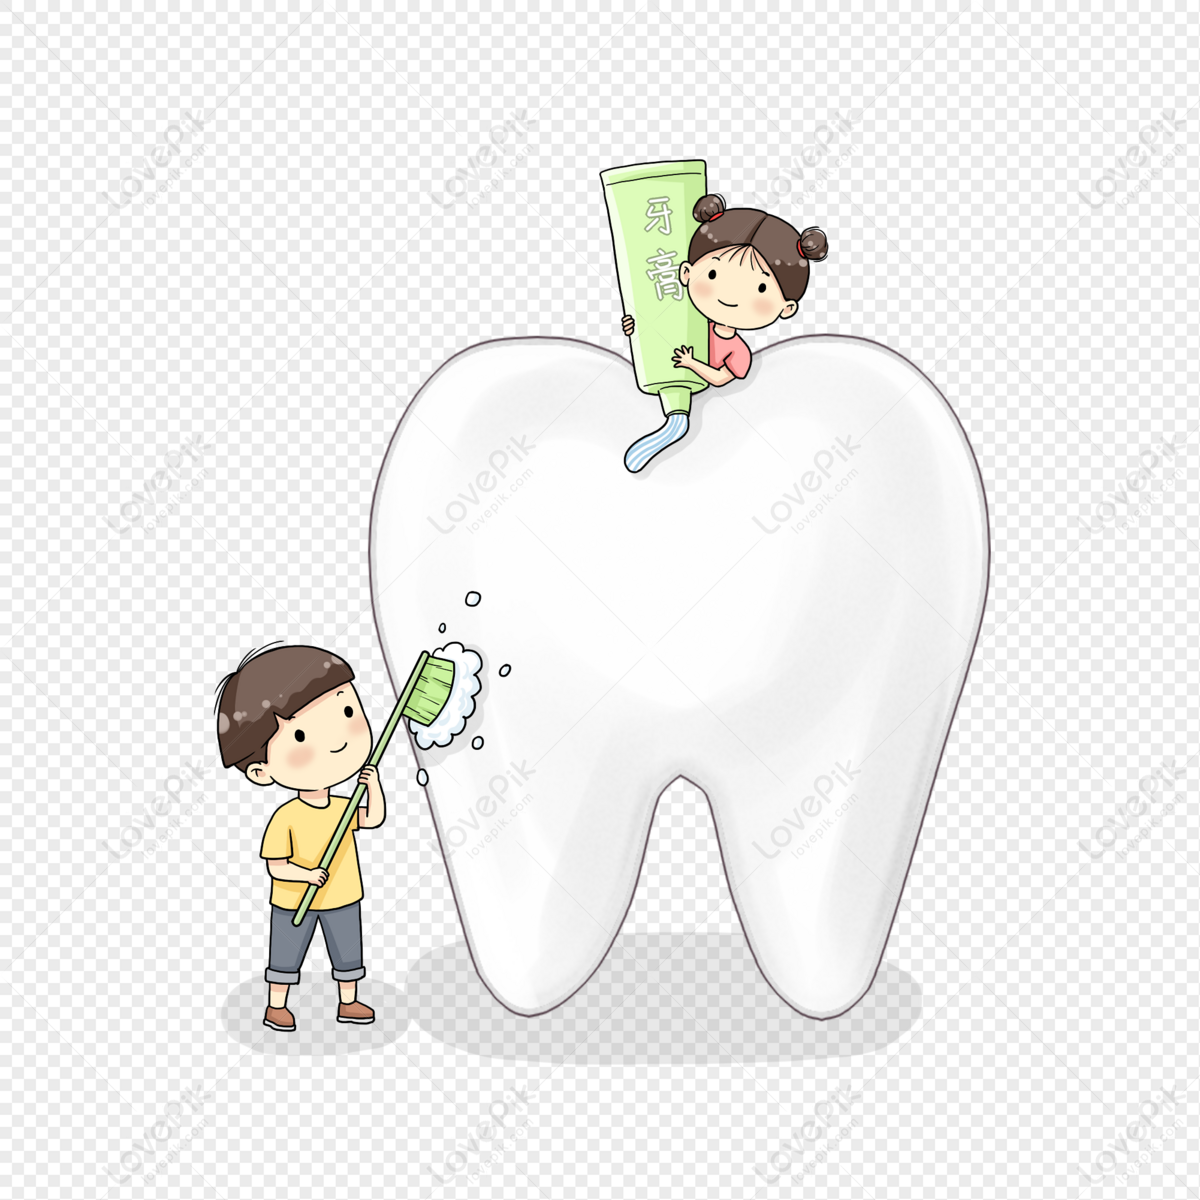 Cartoon Teeth PNG Images With Transparent Background | Free Download On  Lovepik